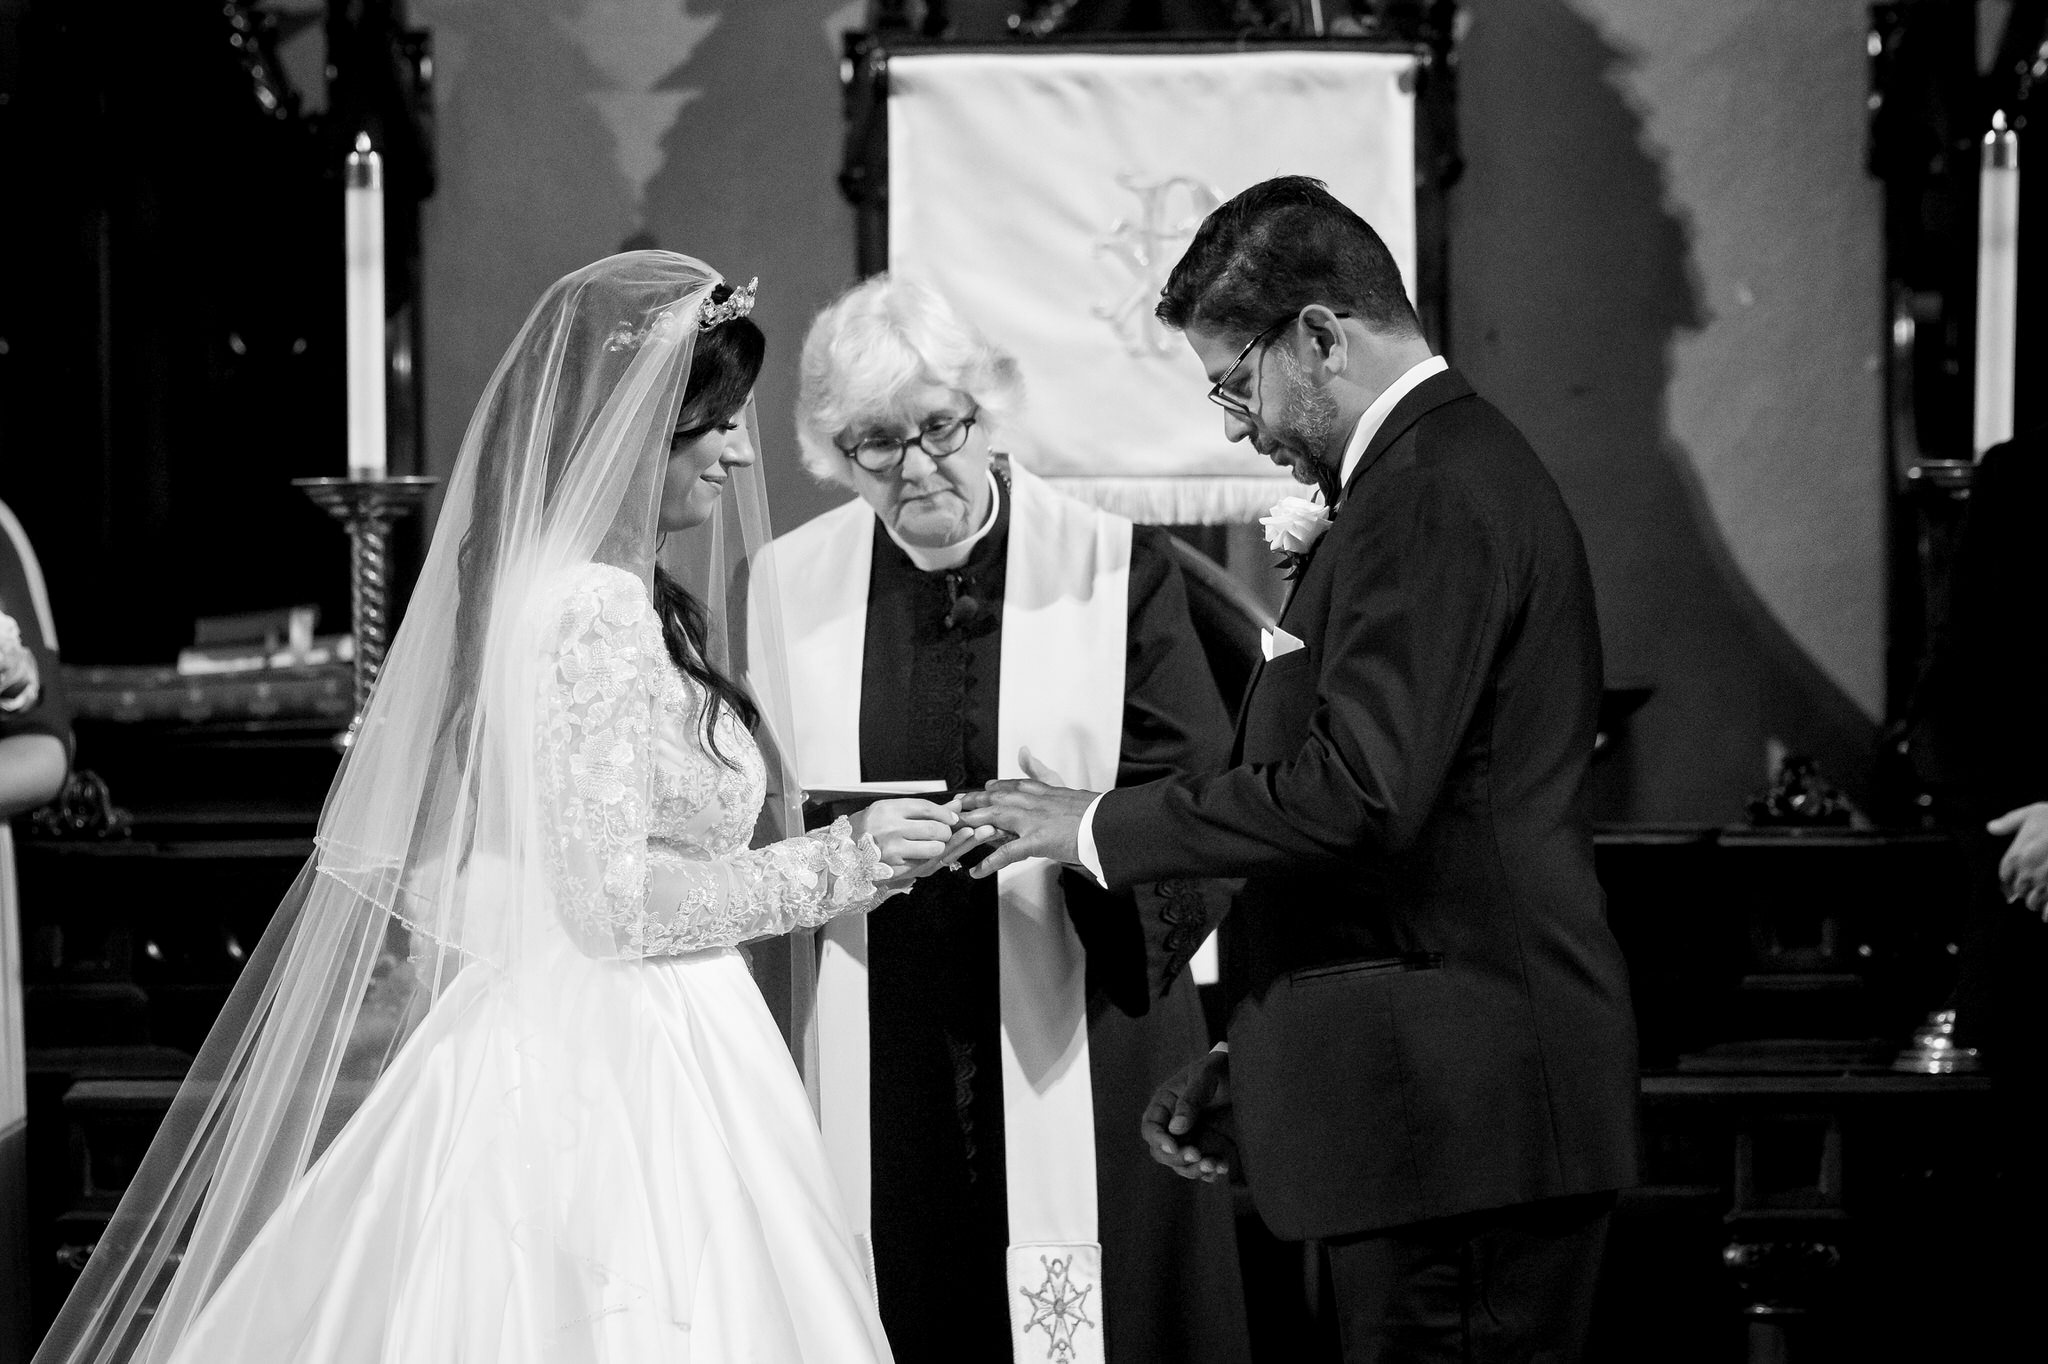 A bride and groom exchange rings at the altar at their Fort Street Presbyterian Church Detroit wedding.